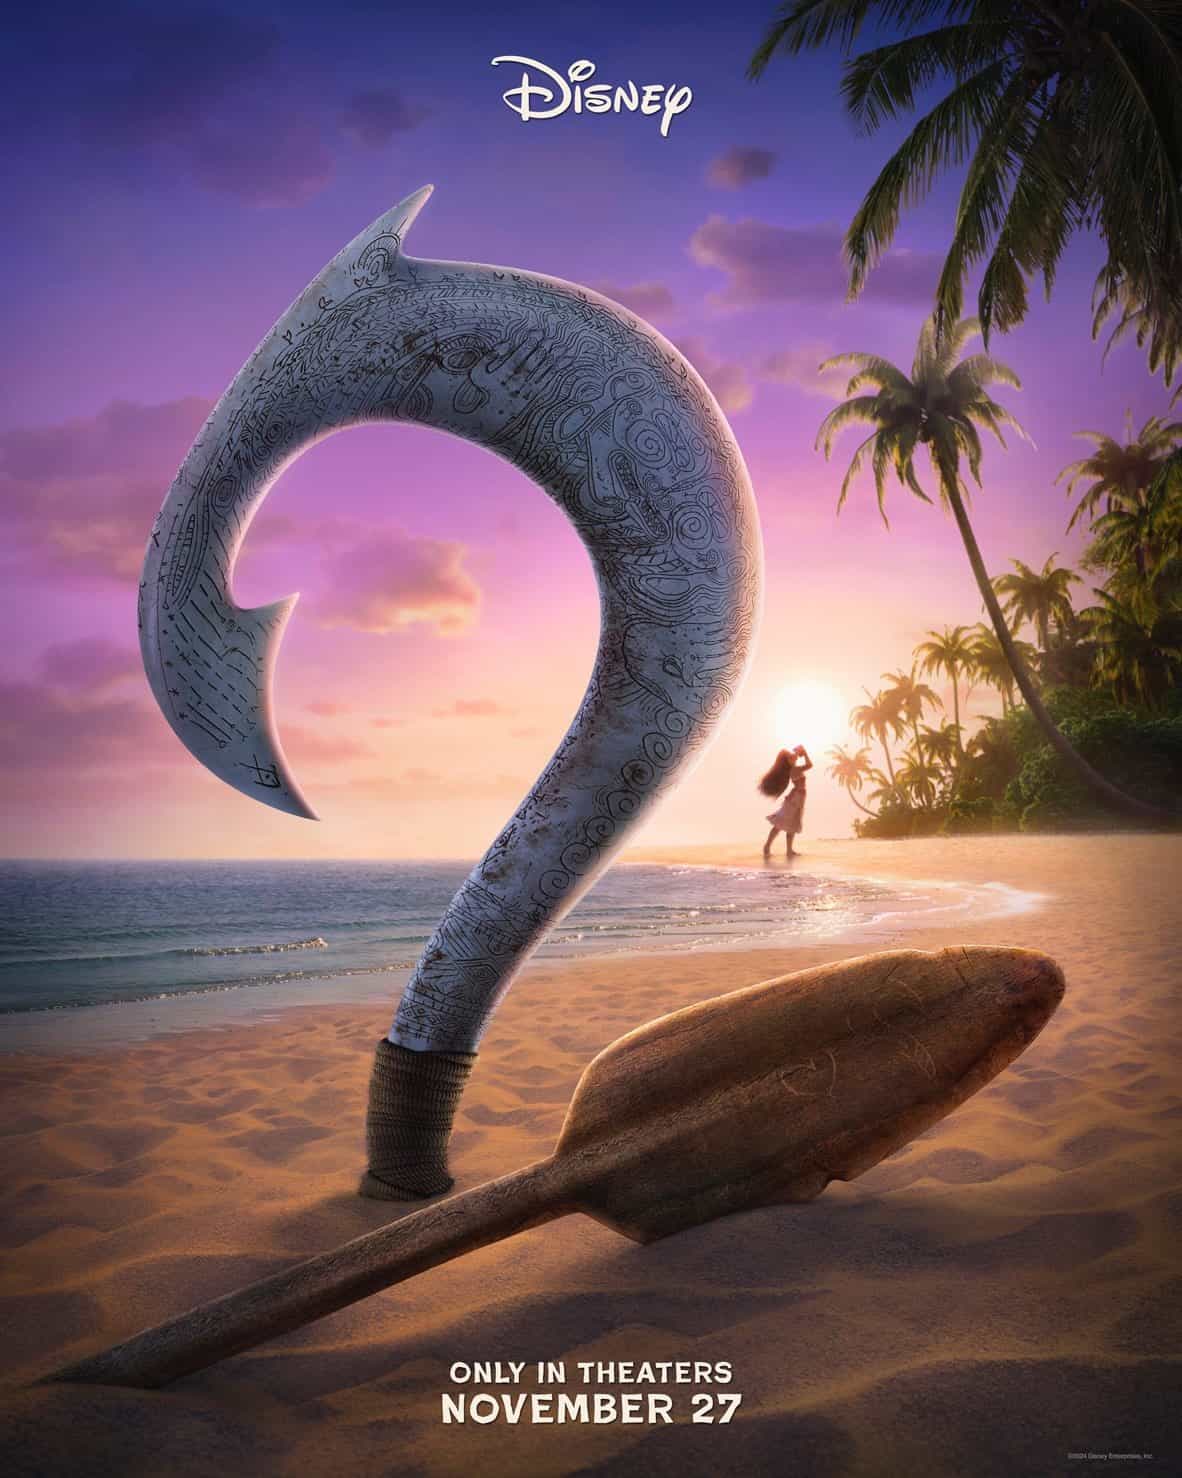 New poster has been released for Moana 2 which stars Auli